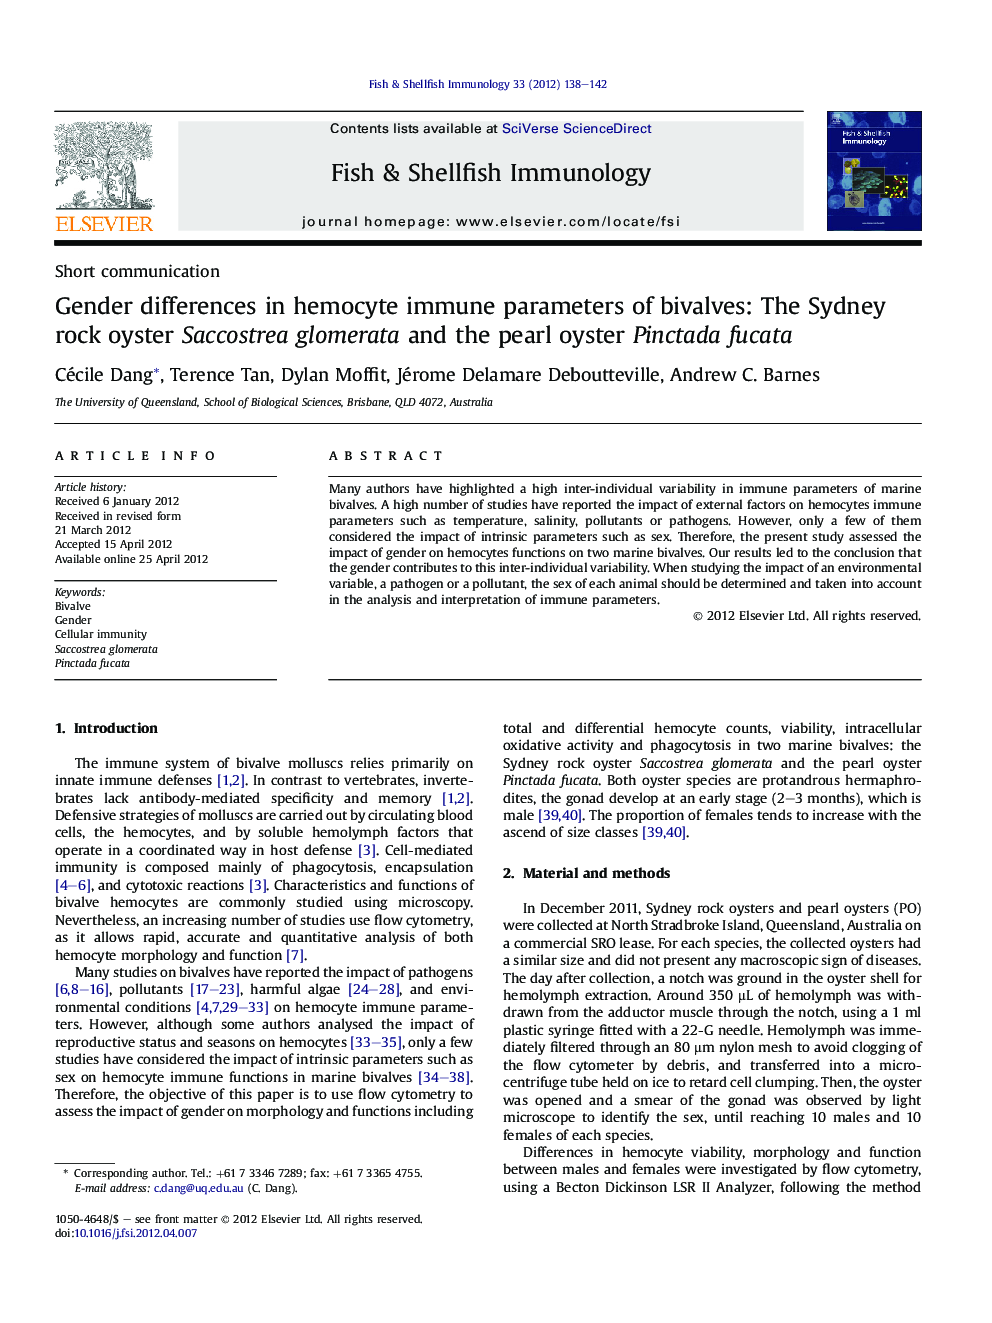 Gender differences in hemocyte immune parameters of bivalves: The Sydney rock oyster Saccostrea glomerata and the pearl oyster Pinctada fucata